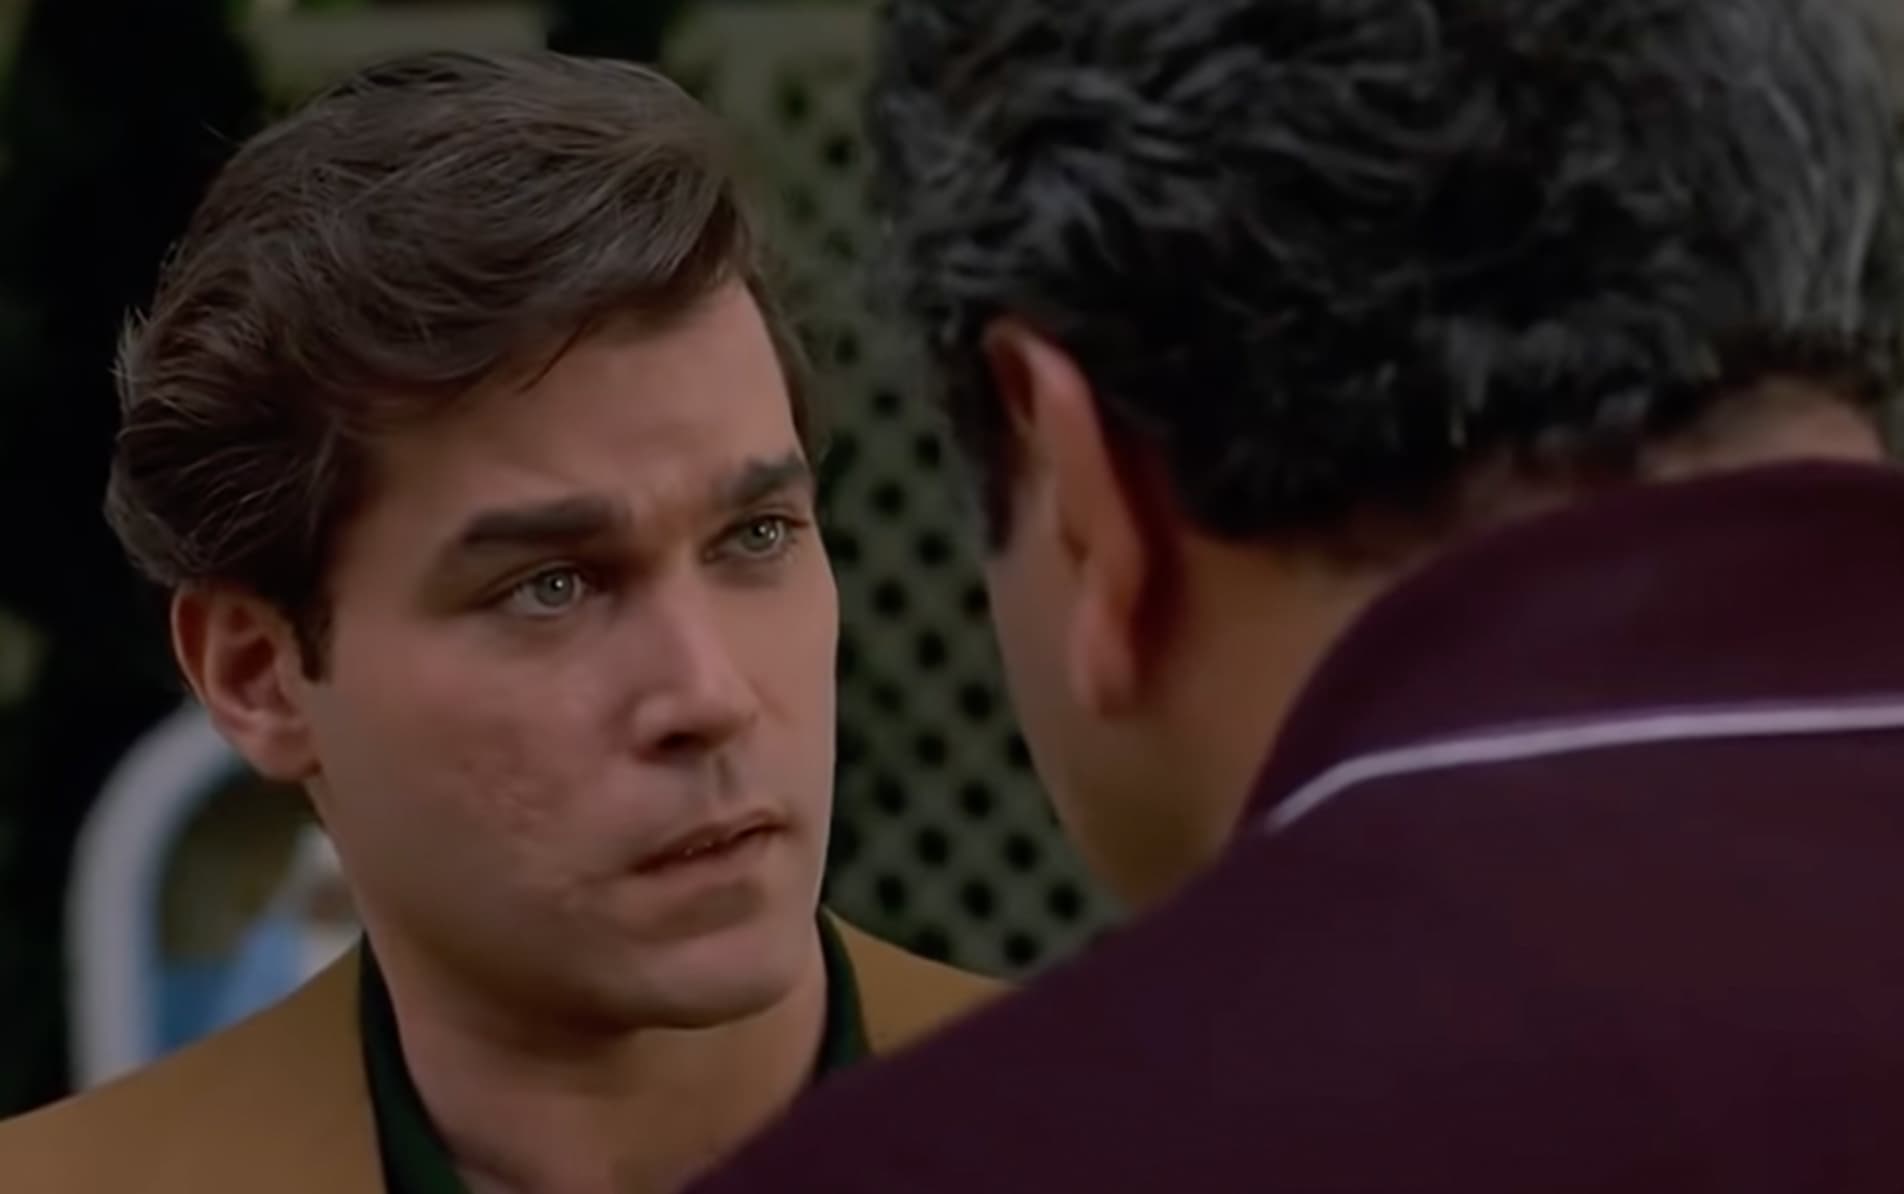 “In Goodfellas, Paul Sorvino slaps Ray Liotta in the face unrehearsed, causing Liotta's character to have a genuinely surprised reaction.”